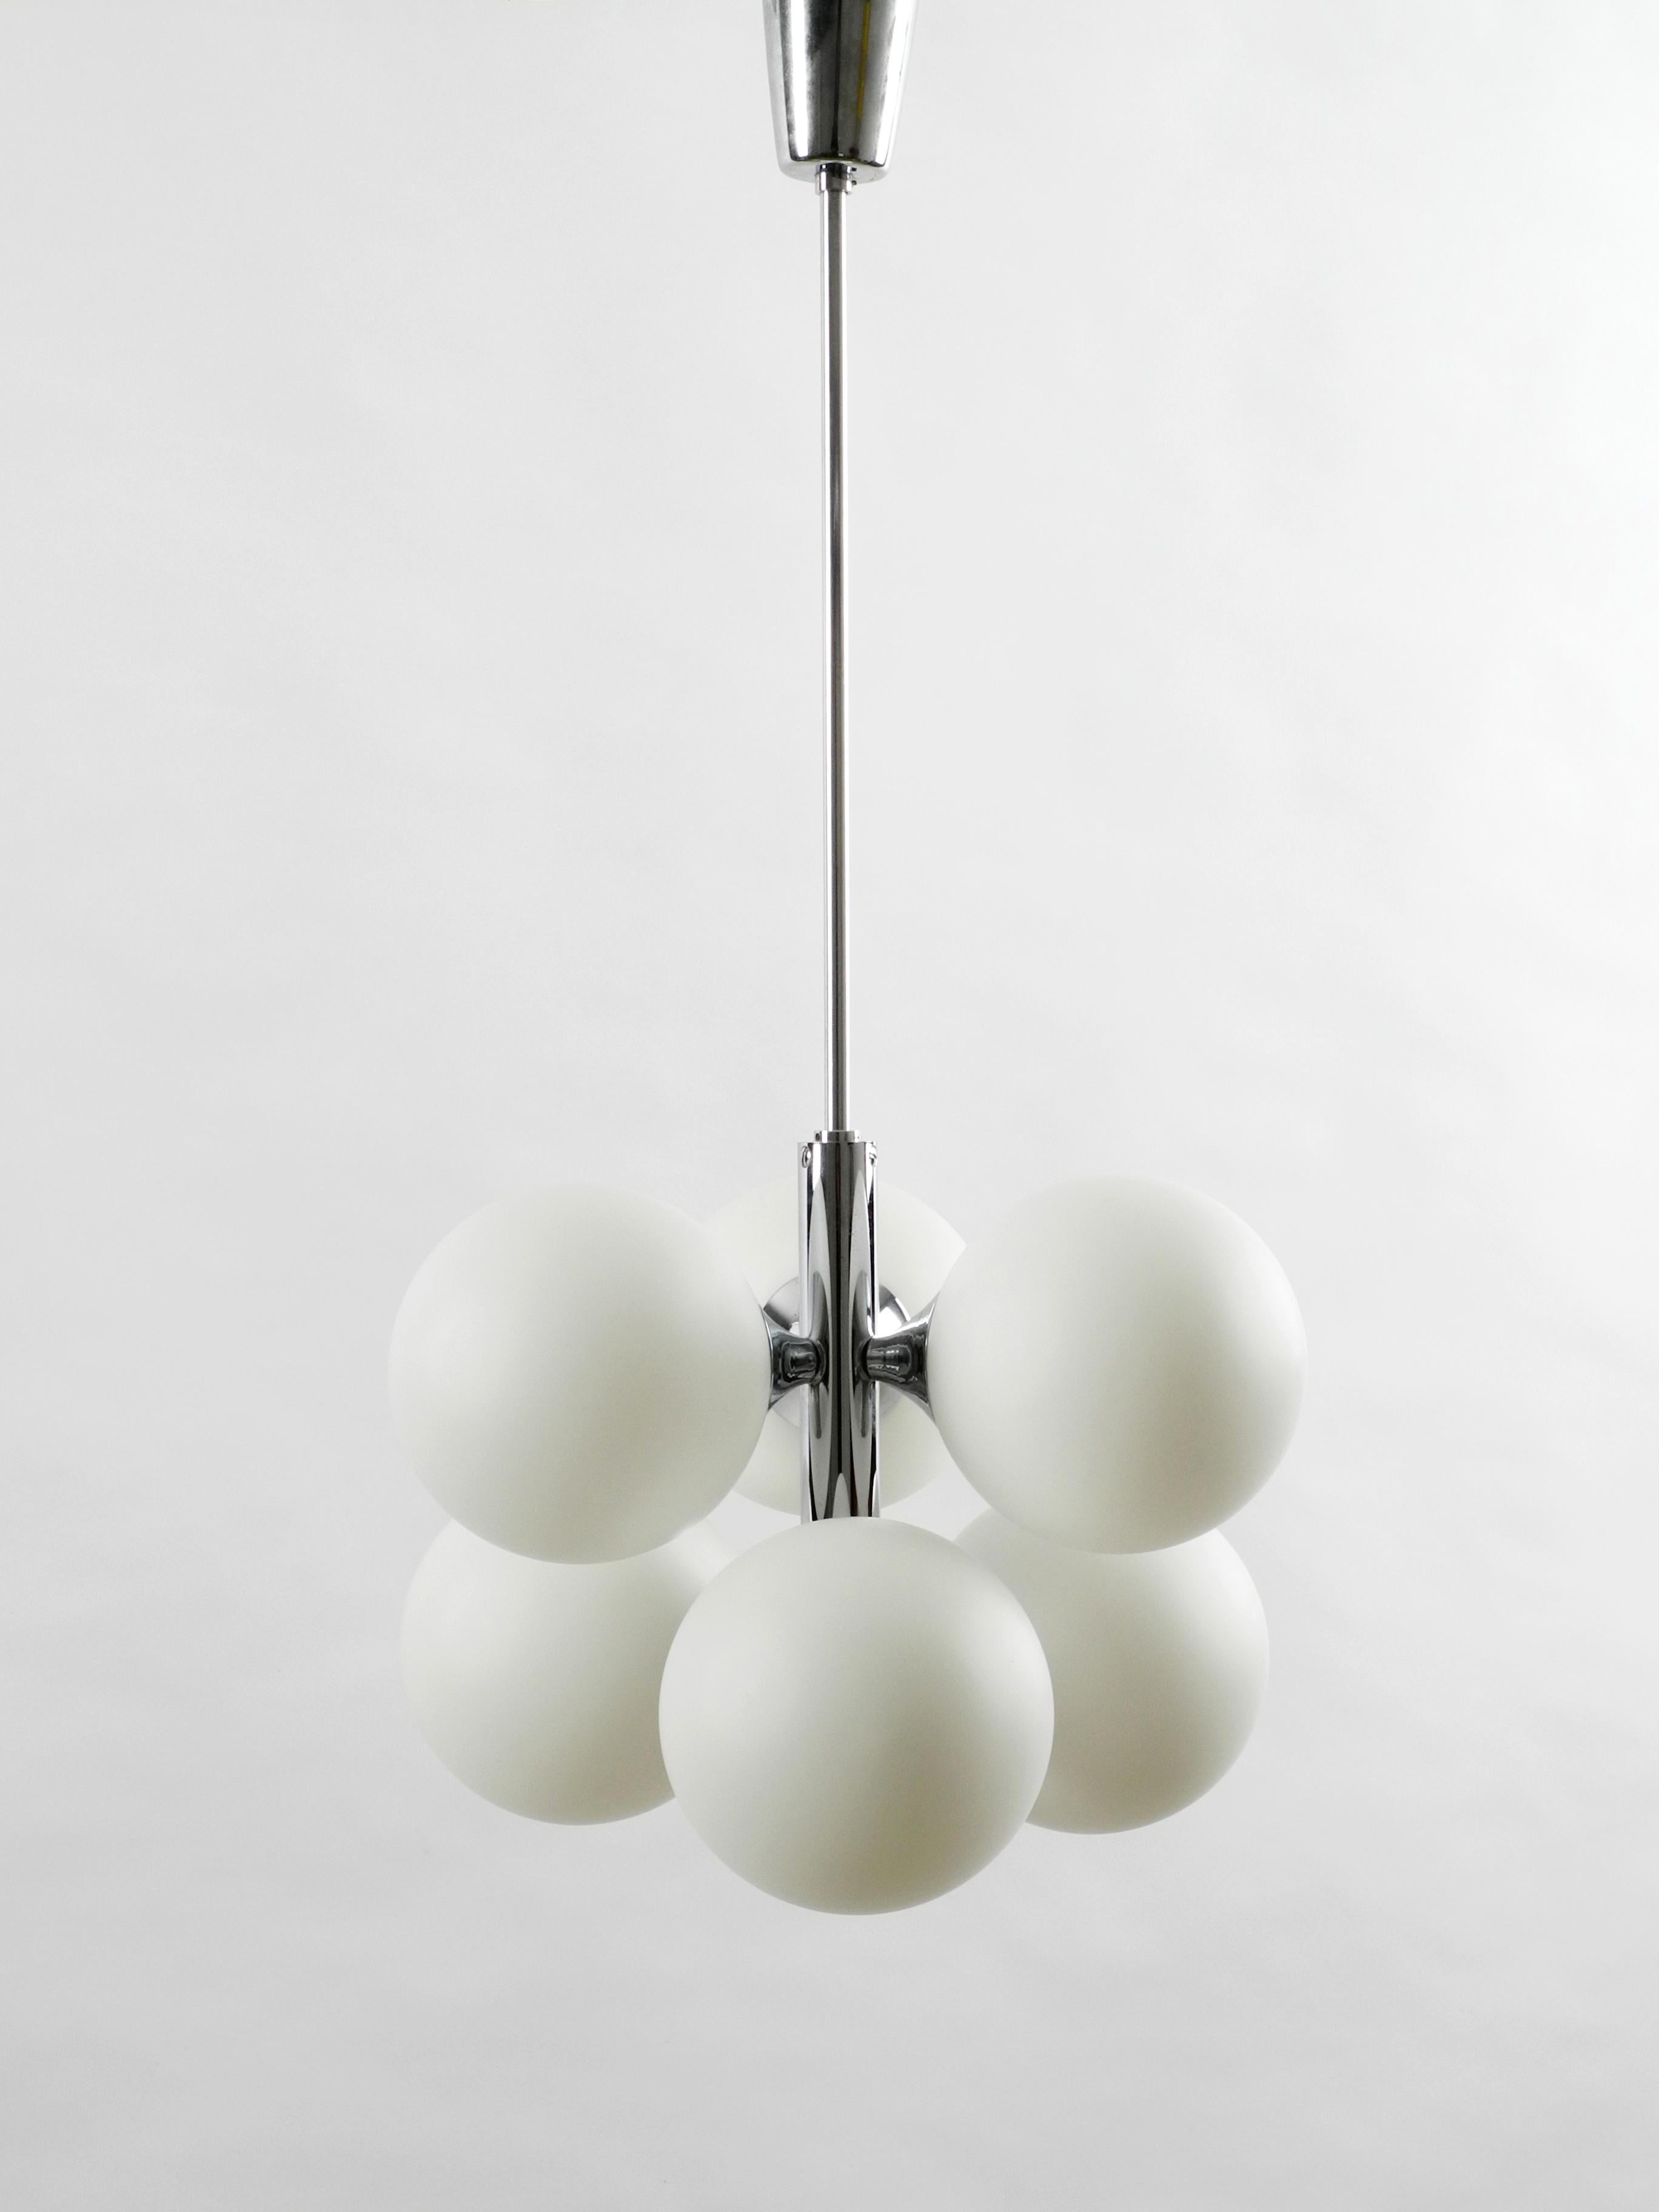 German 1960s Kaiser Chrome-Plated Metal Ceiling Lamp with 6 Opal Glass Balls Sp